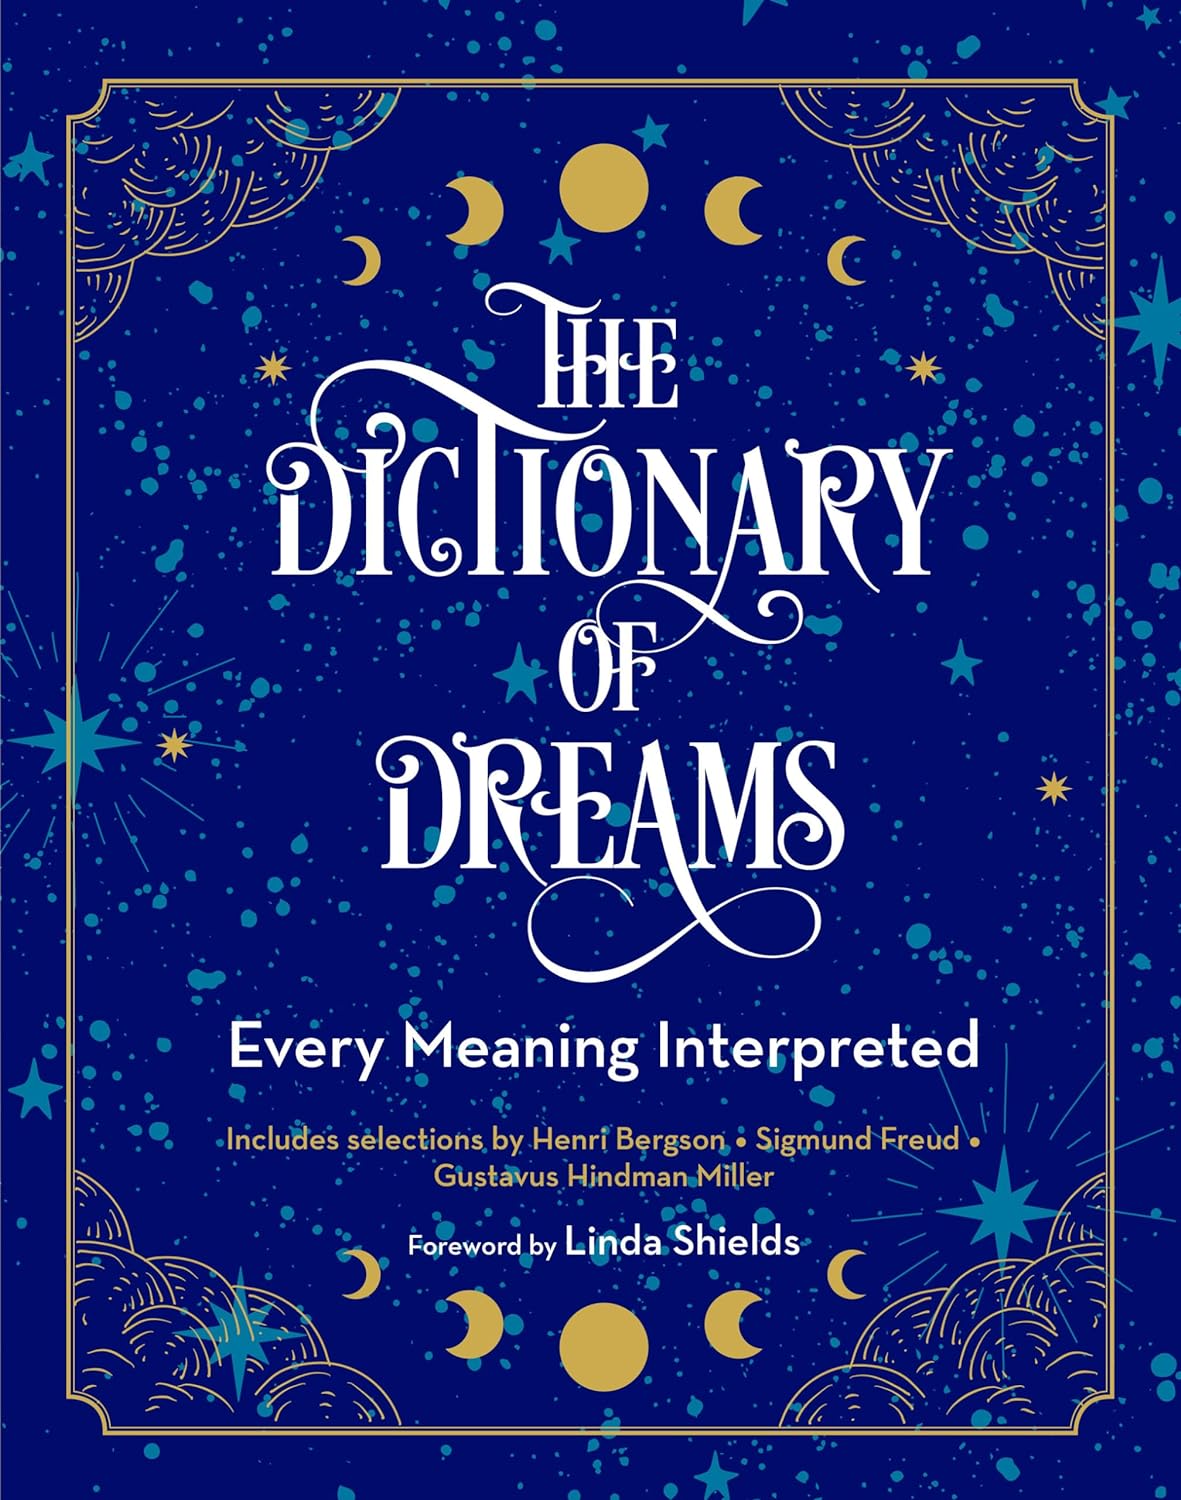 The Dictionary of Dreams - Every Meaning Interpreted (Complete Illustrated Encyclopedia #2) (1ST ed.) - CA Corrections Bookstore